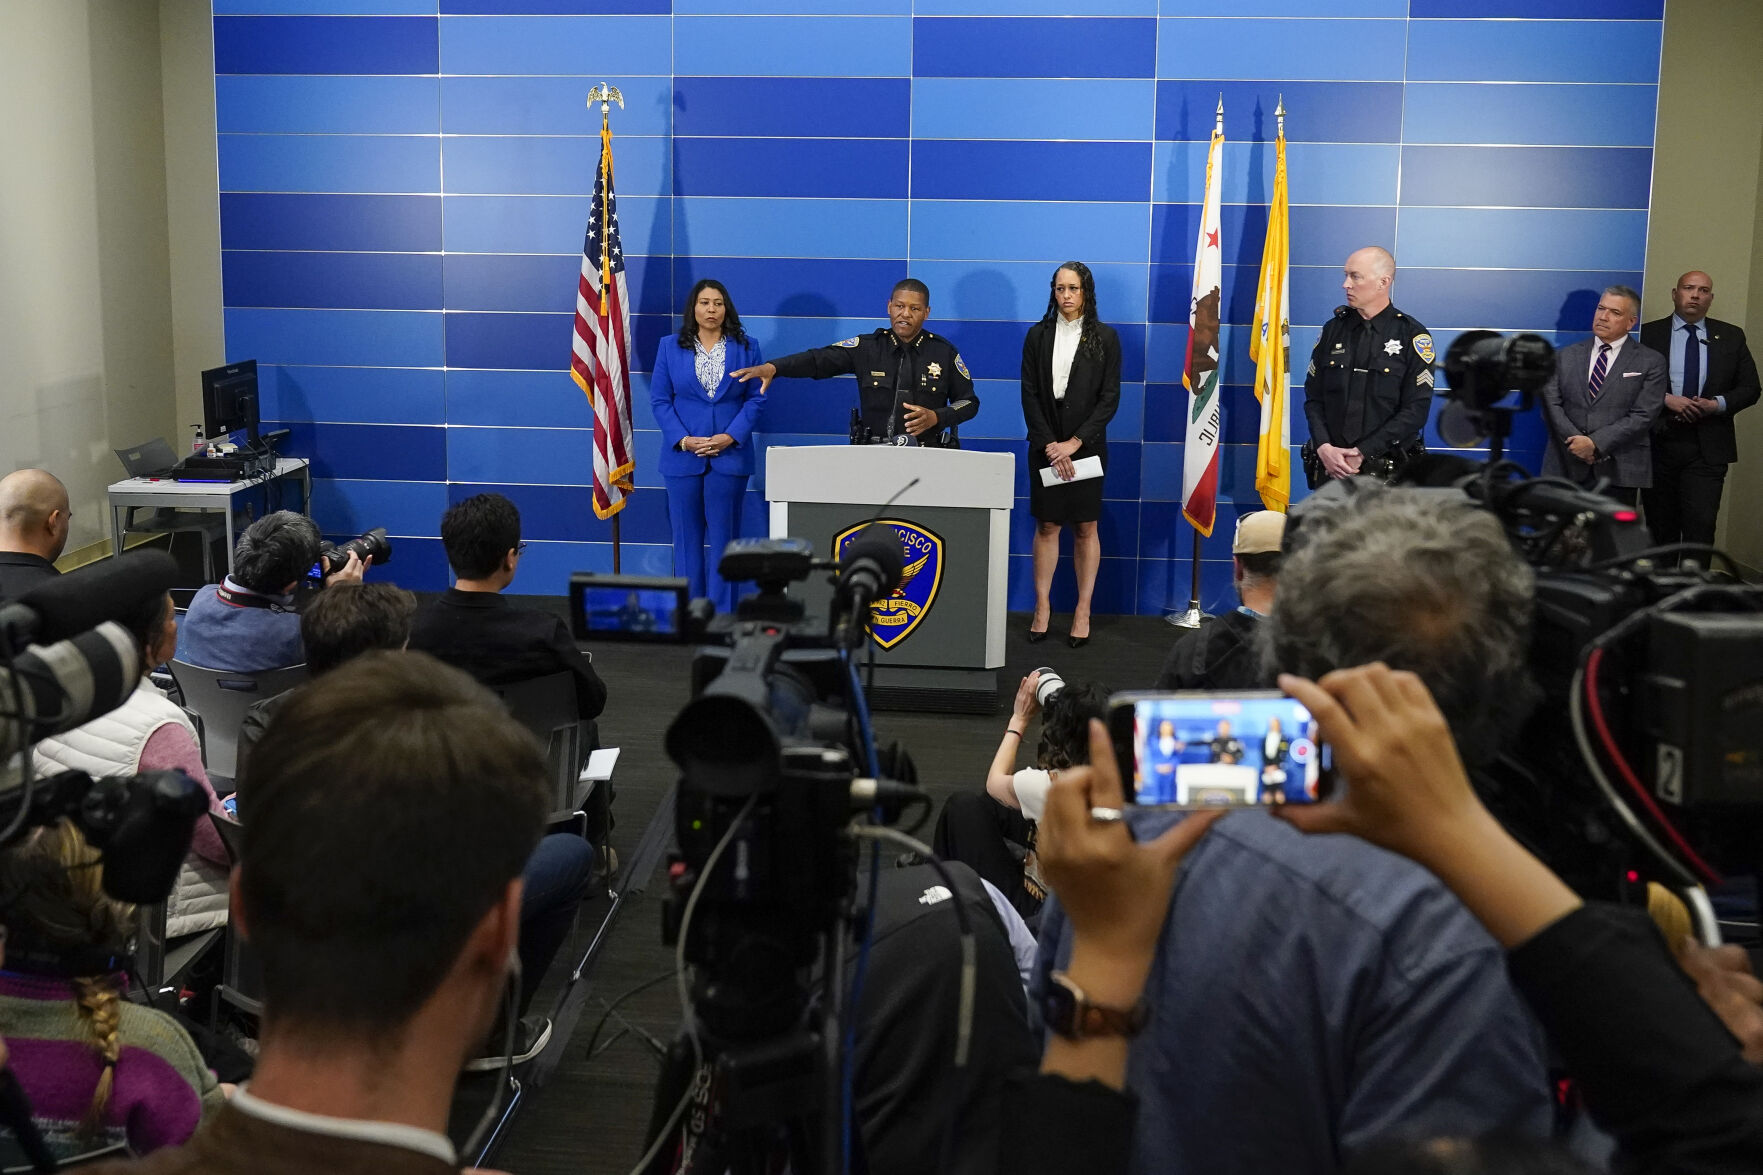 <p>San Francisco Police chief William Scott, center, provides an update on the homicide investigation of Robert Lee during a press conference where officials announced the arrest of a suspect, Thursday, April 13, 2023, in San Francisco. (AP Photo/Godofredo A. Vásquez)</p>   PHOTO CREDIT: Godofredo A. Vásquez - staff, AP